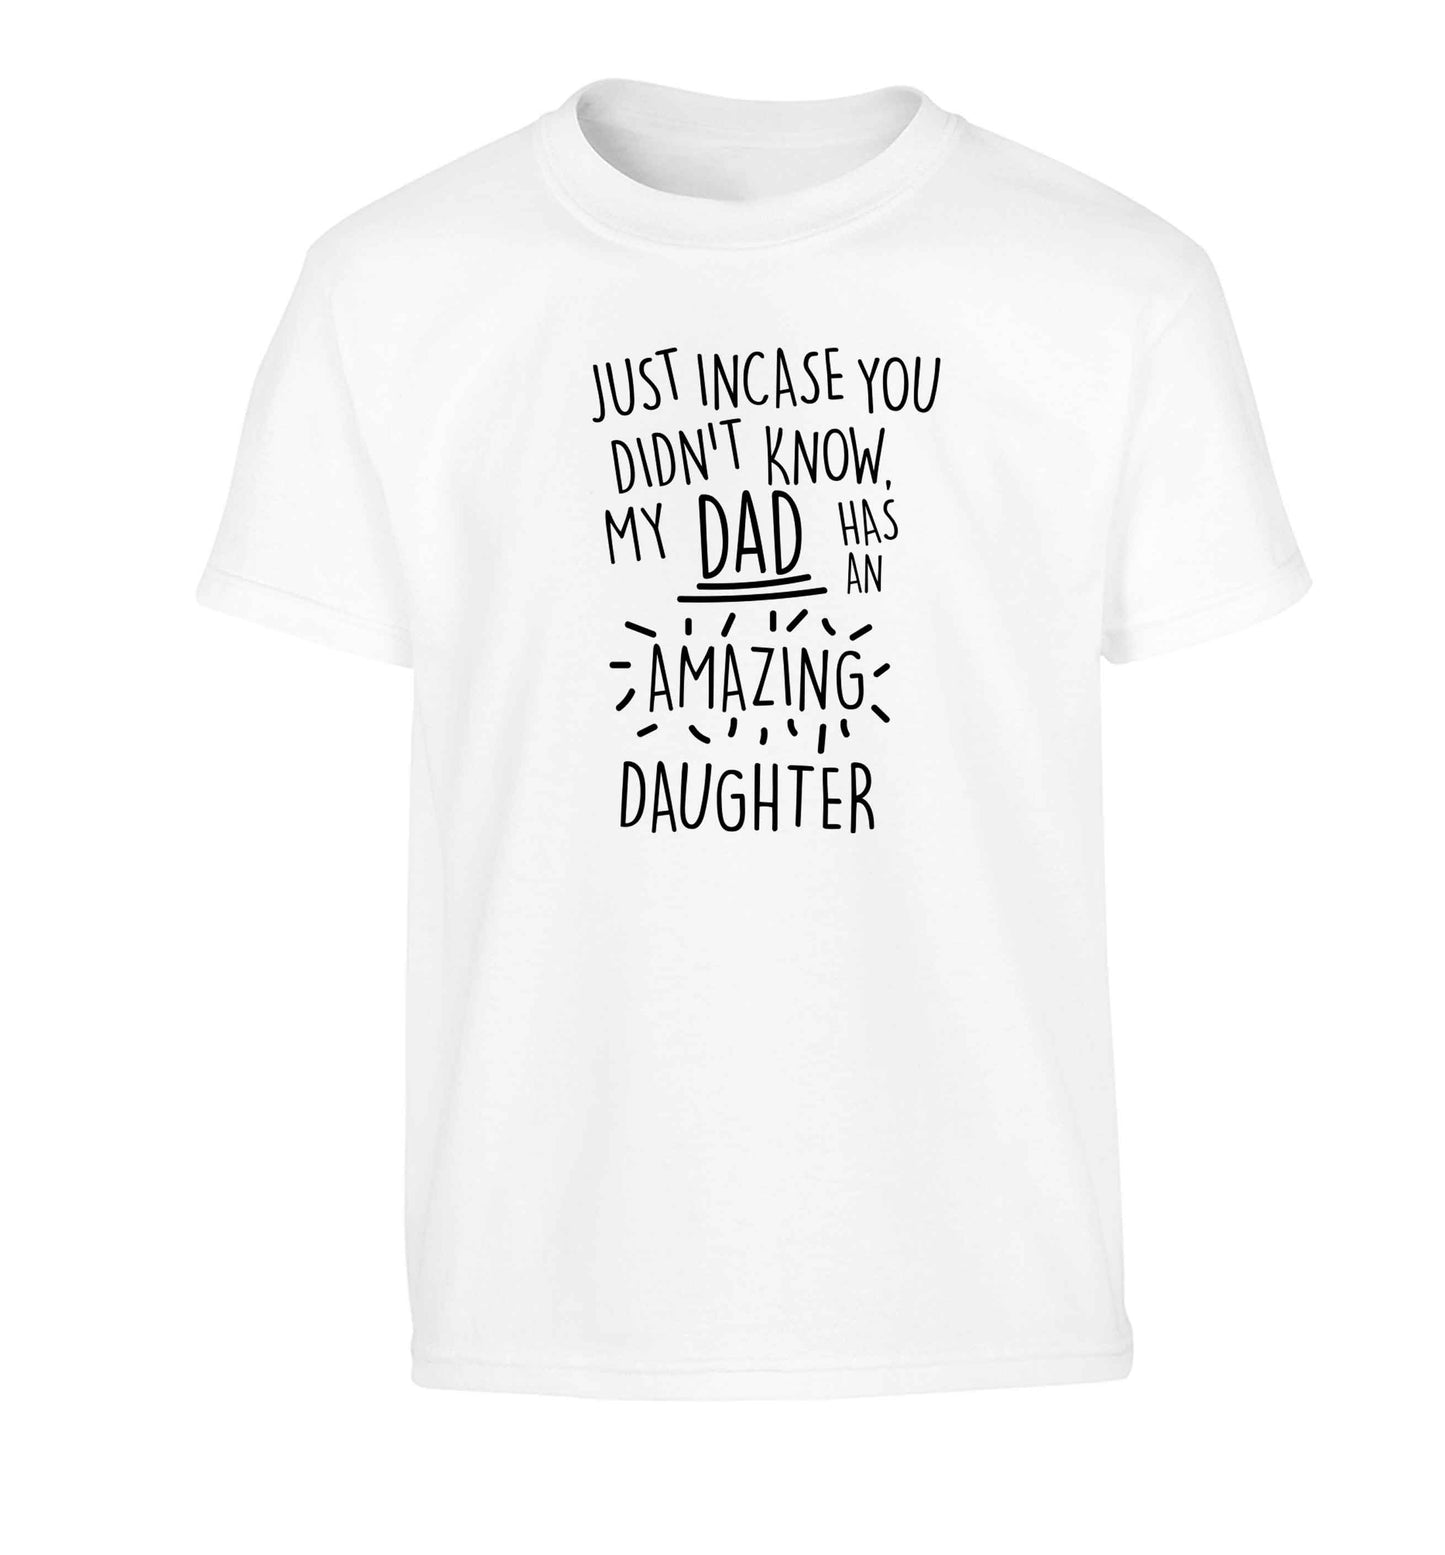 Just incase you didn't know my dad has an amazing daughter Children's white Tshirt 12-13 Years